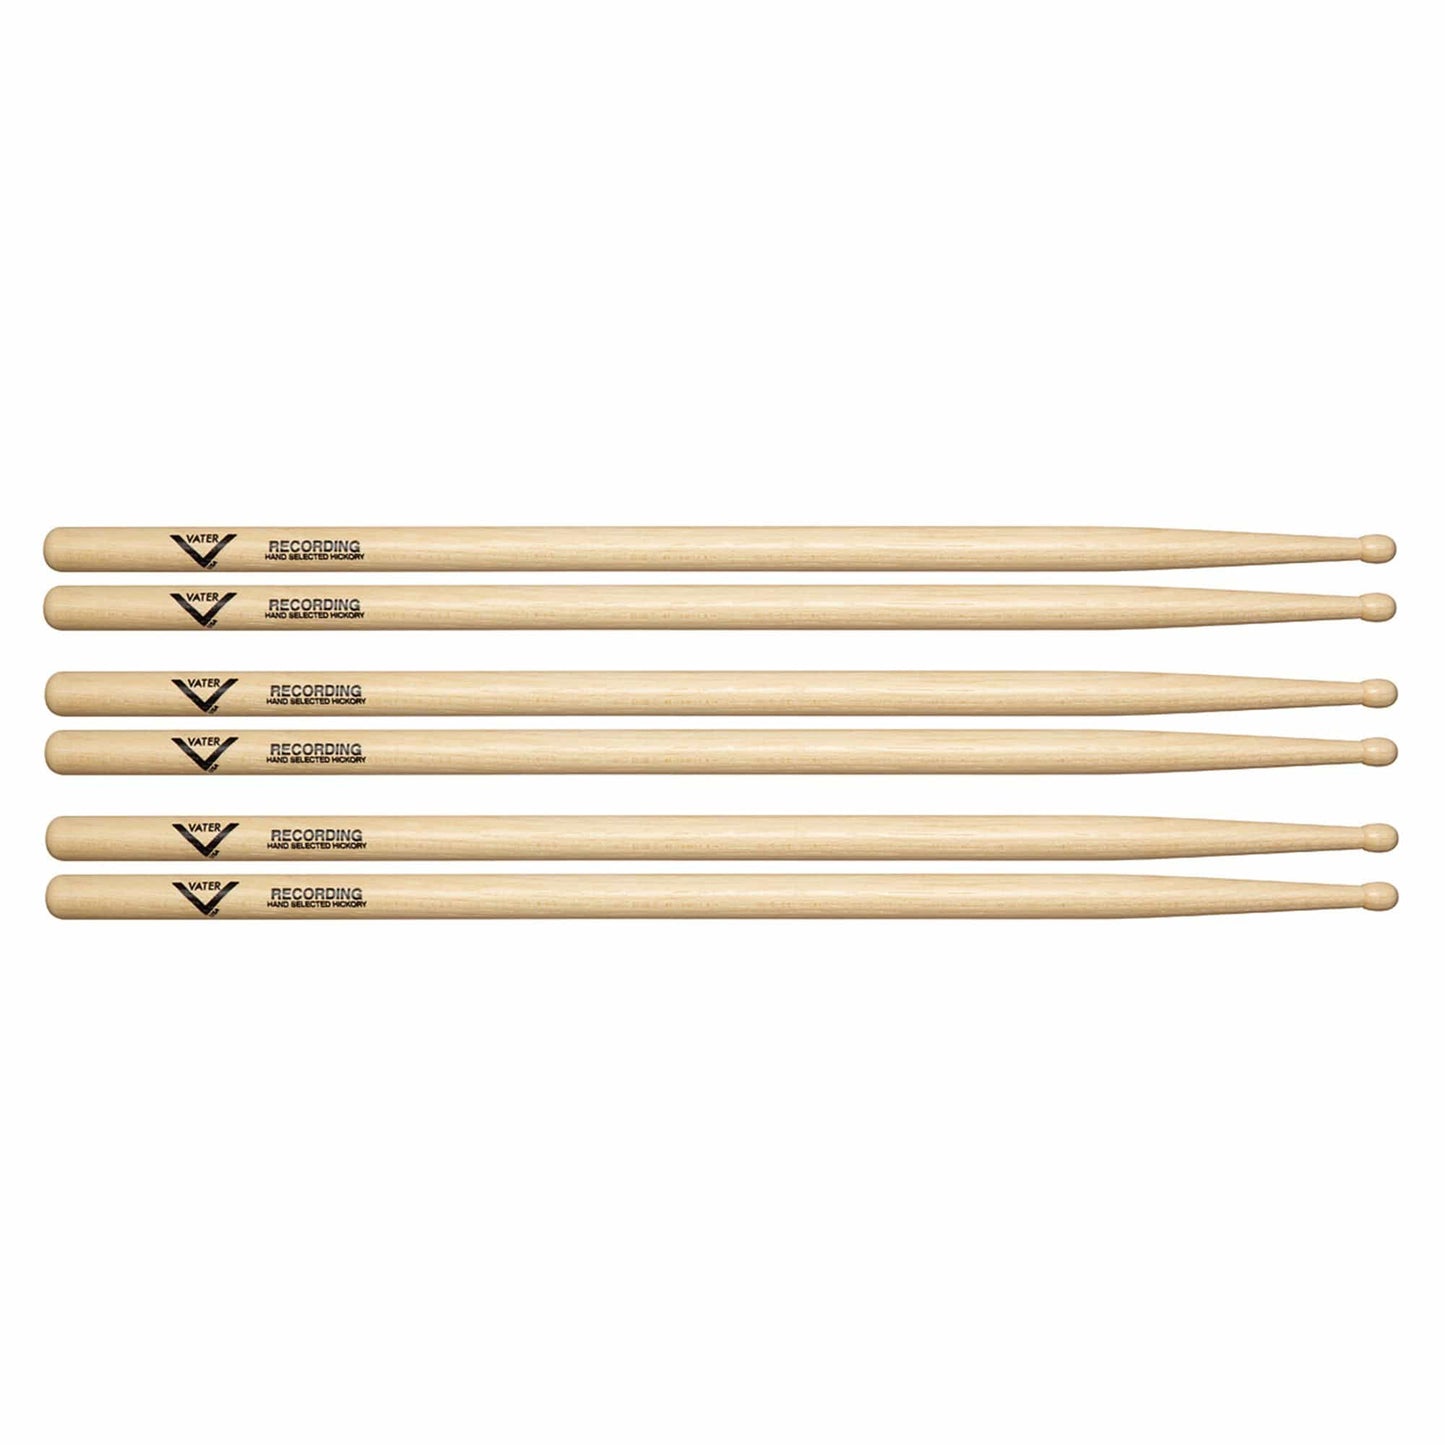 Vater Hickory Recording Wood Tip Drum Sticks (3 Pair Bundle) Drums and Percussion / Parts and Accessories / Drum Sticks and Mallets